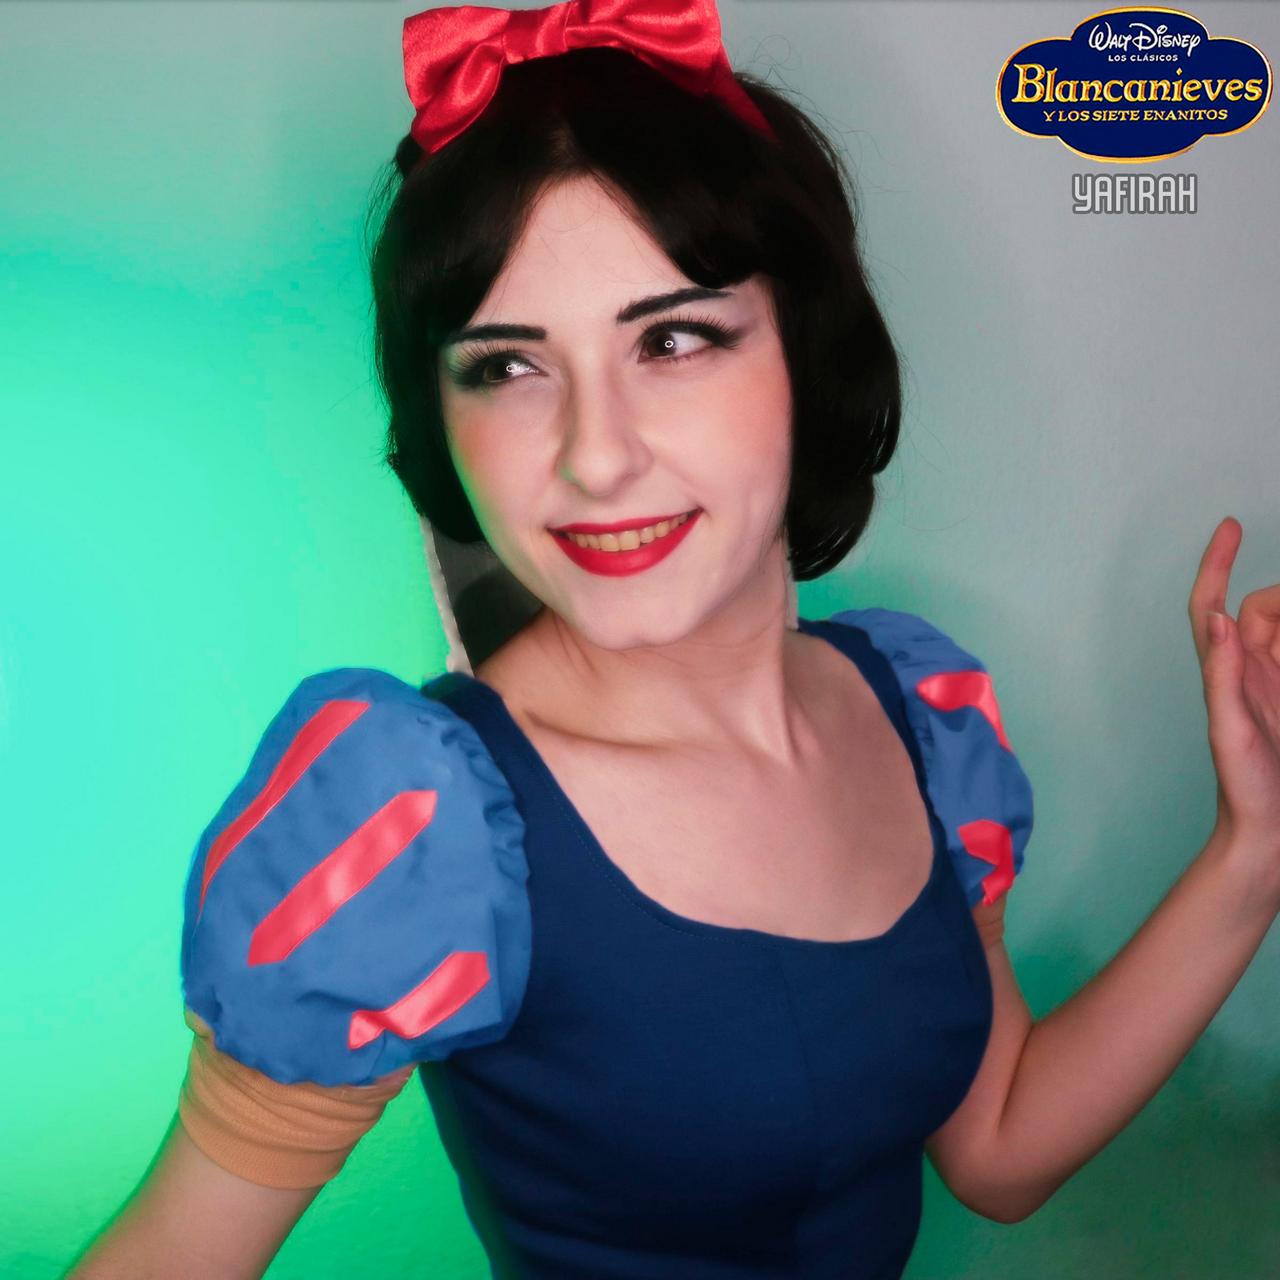 Snow White Blancanieves From Disney Makeup Test By Yafira